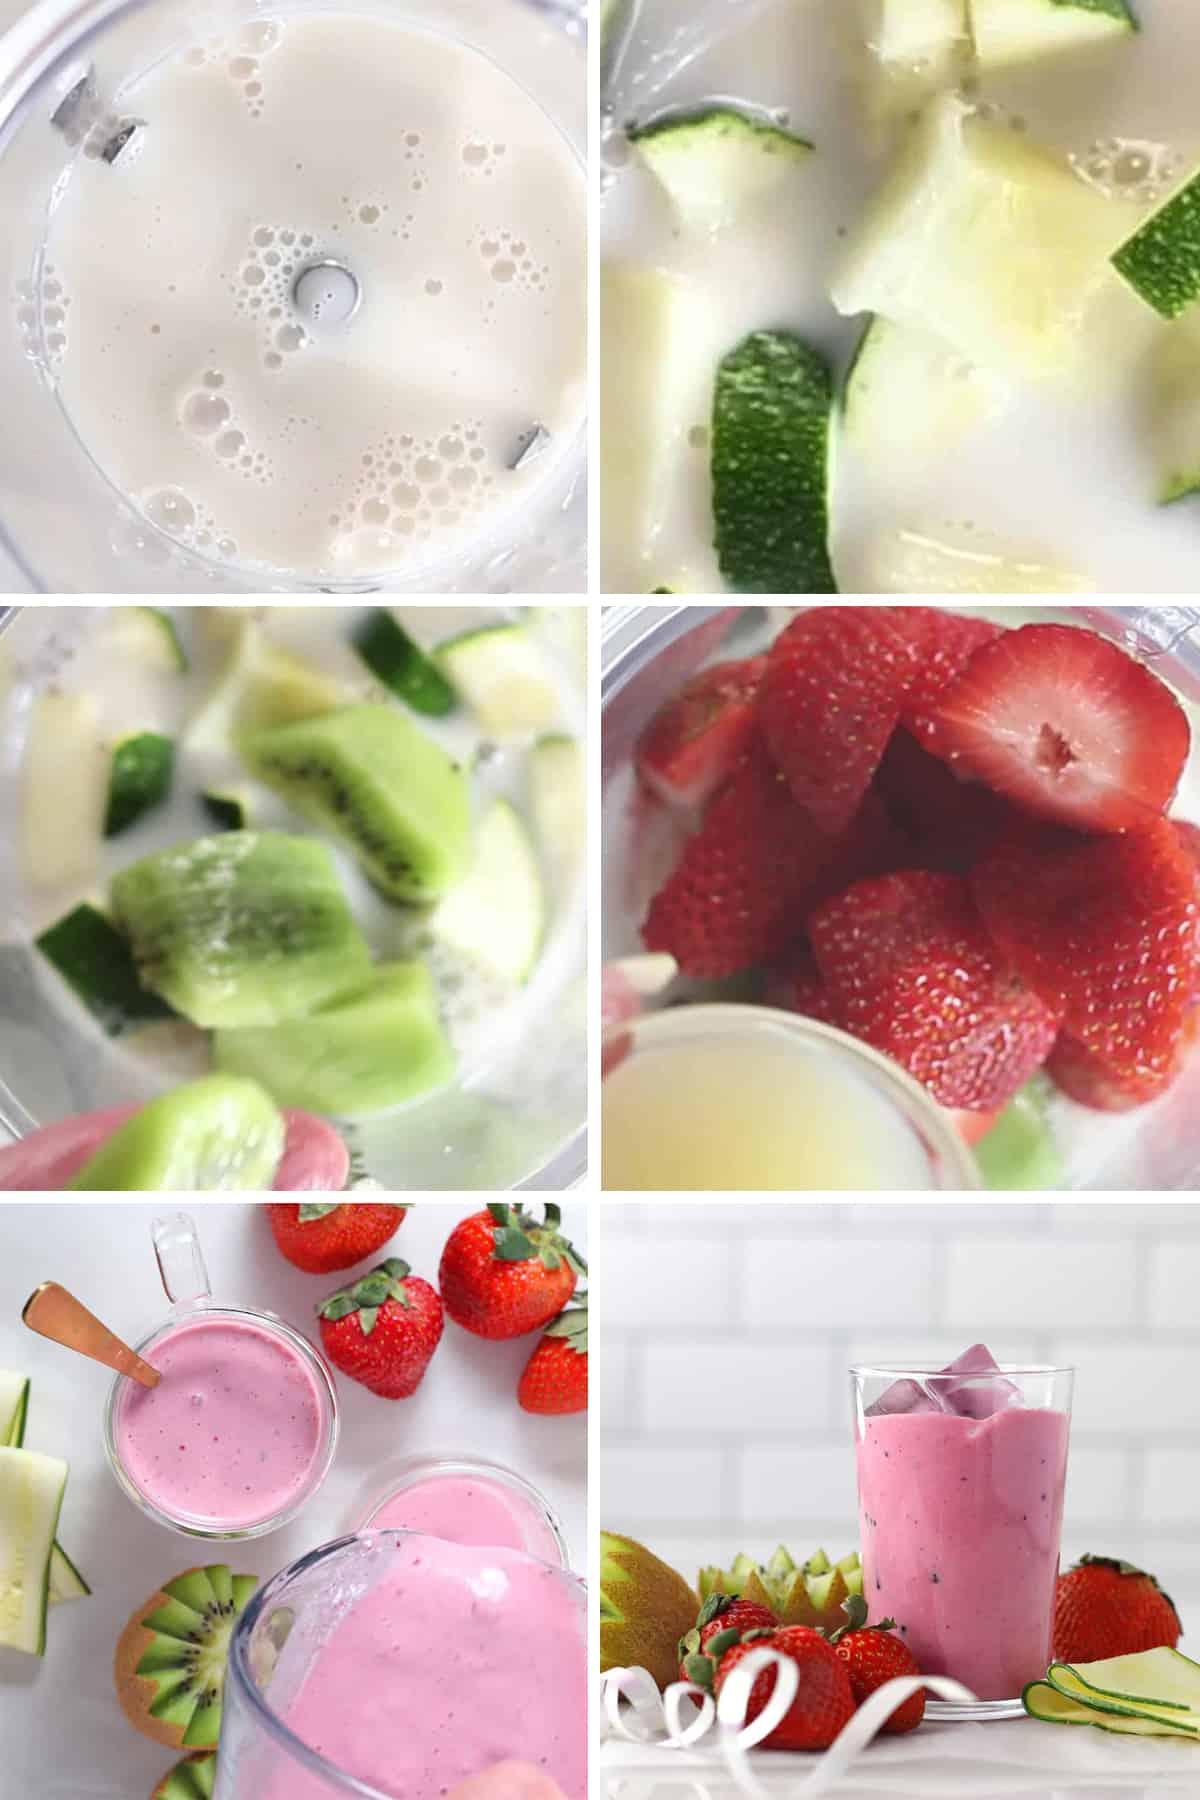 steps to make a healthy strawberry smoothie